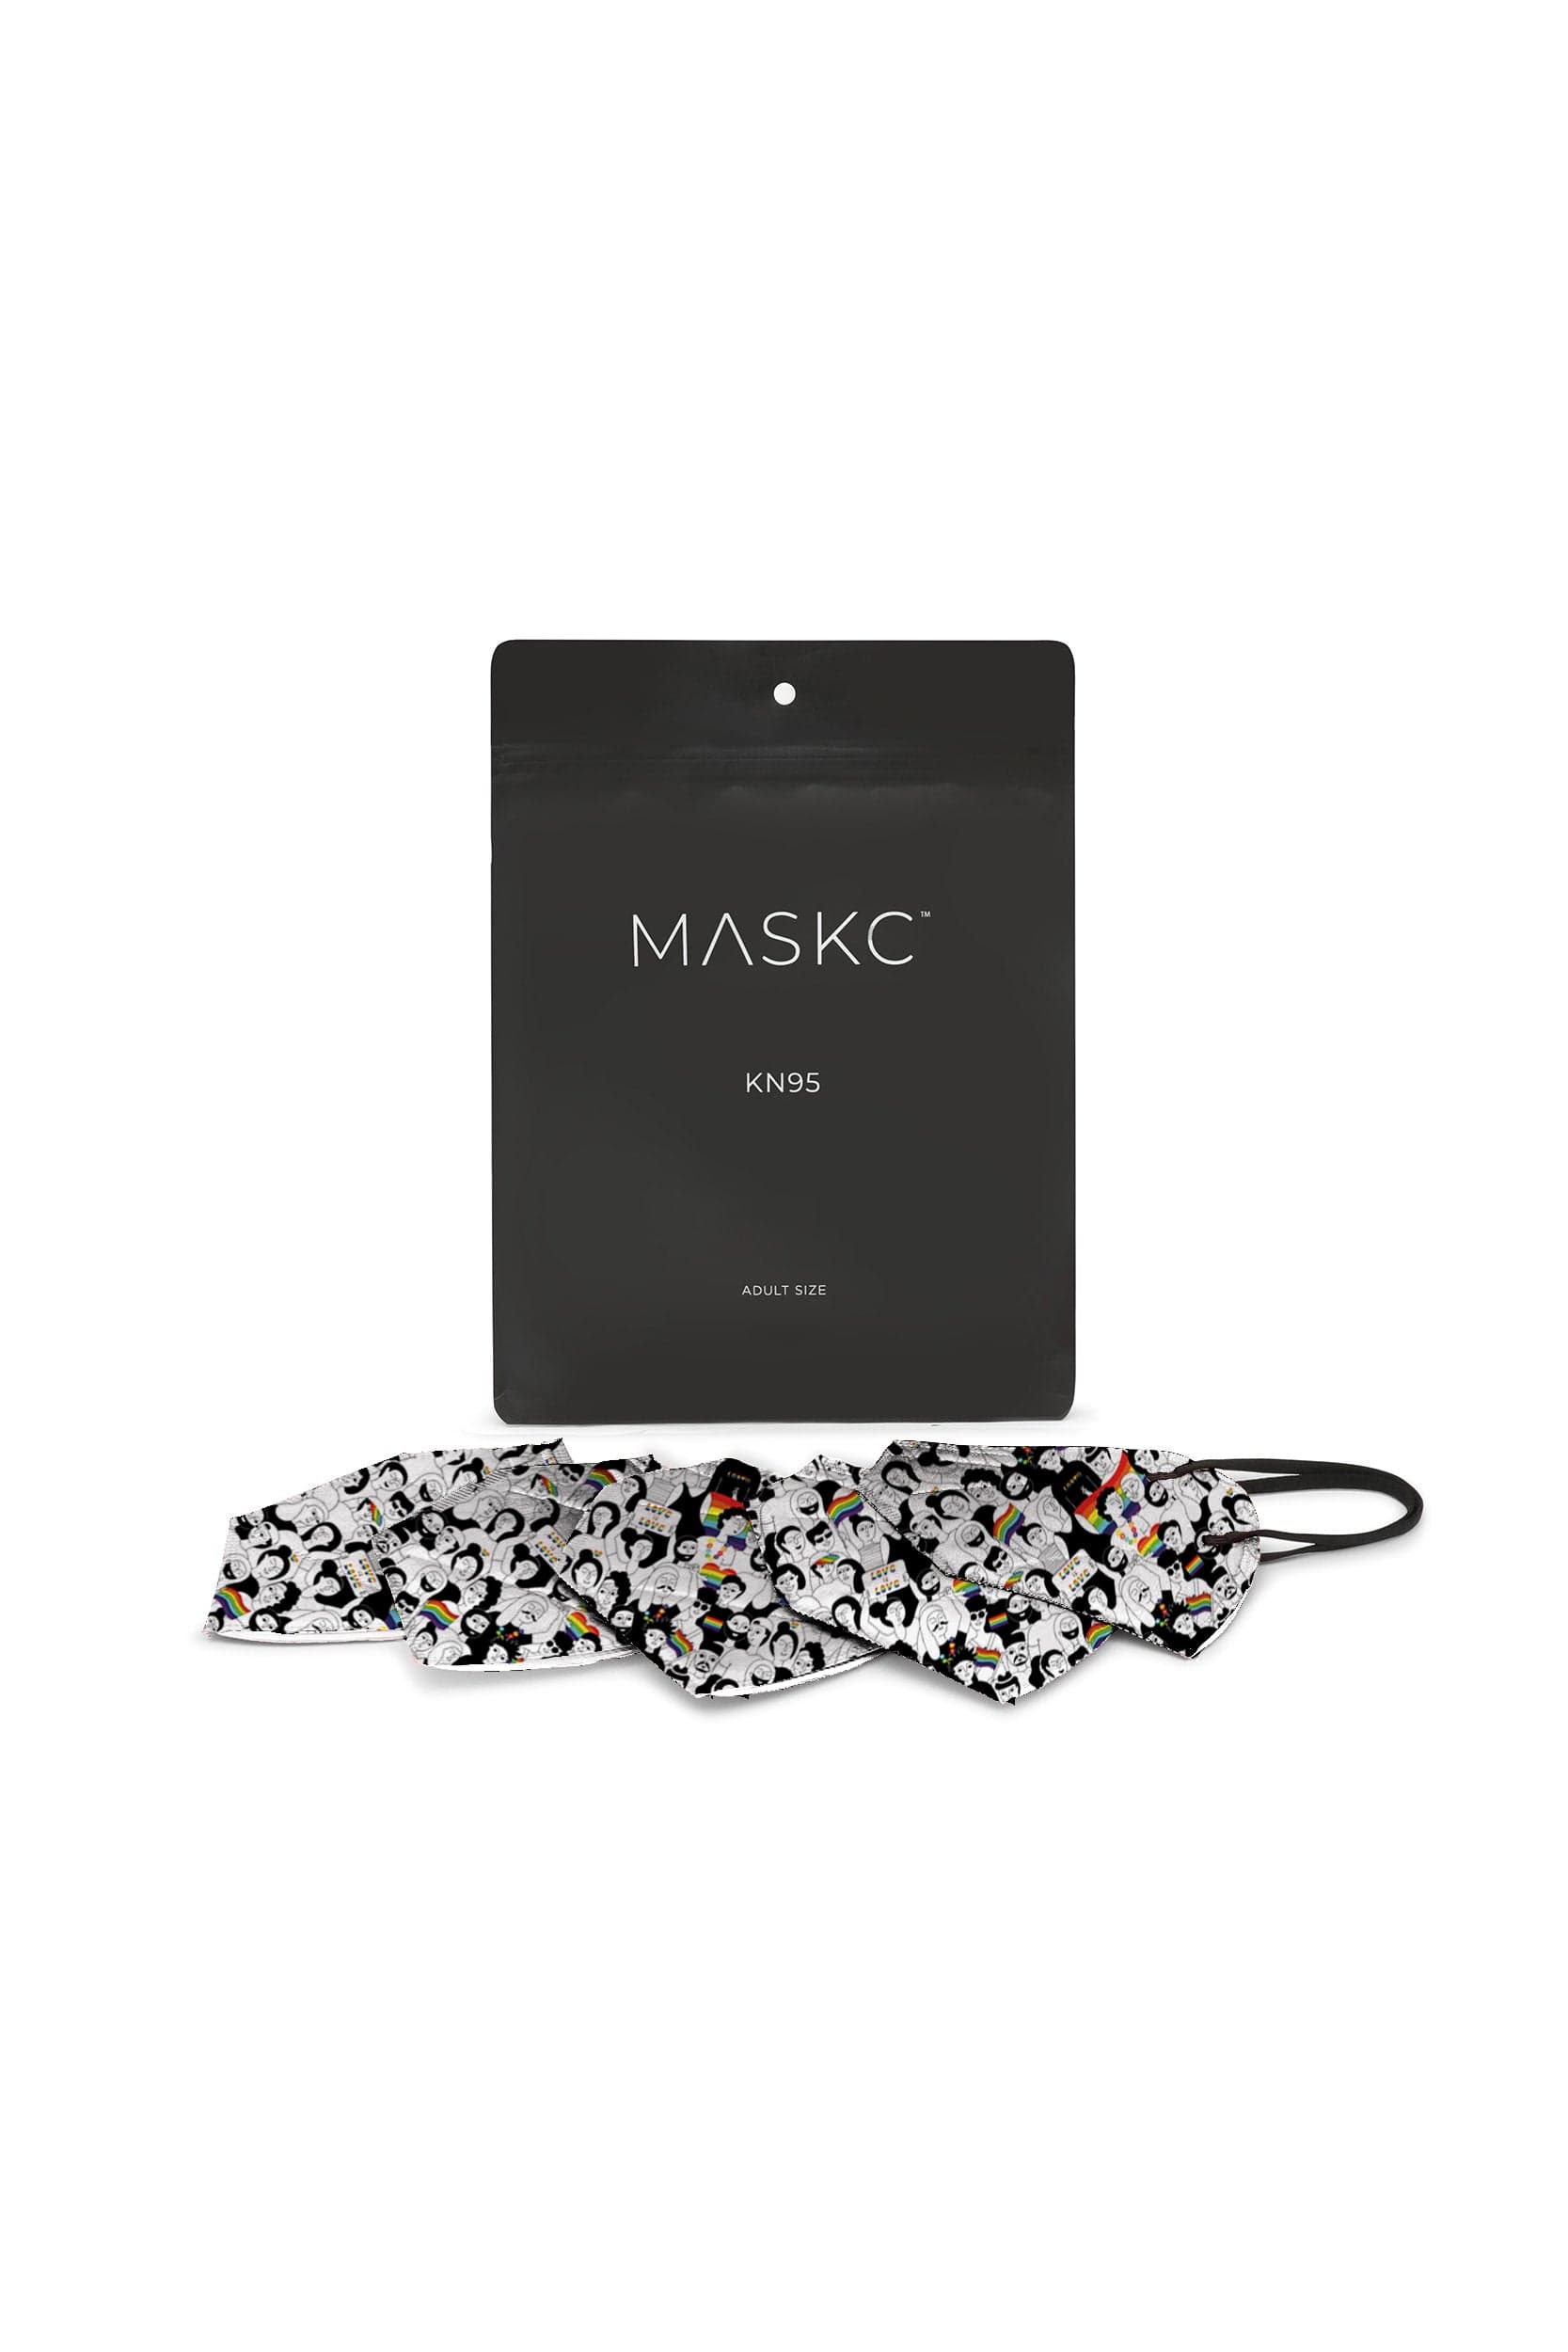 Pack of Pride & Equality print KN95 face masks. Each pack contains stylish high quality face masks. 